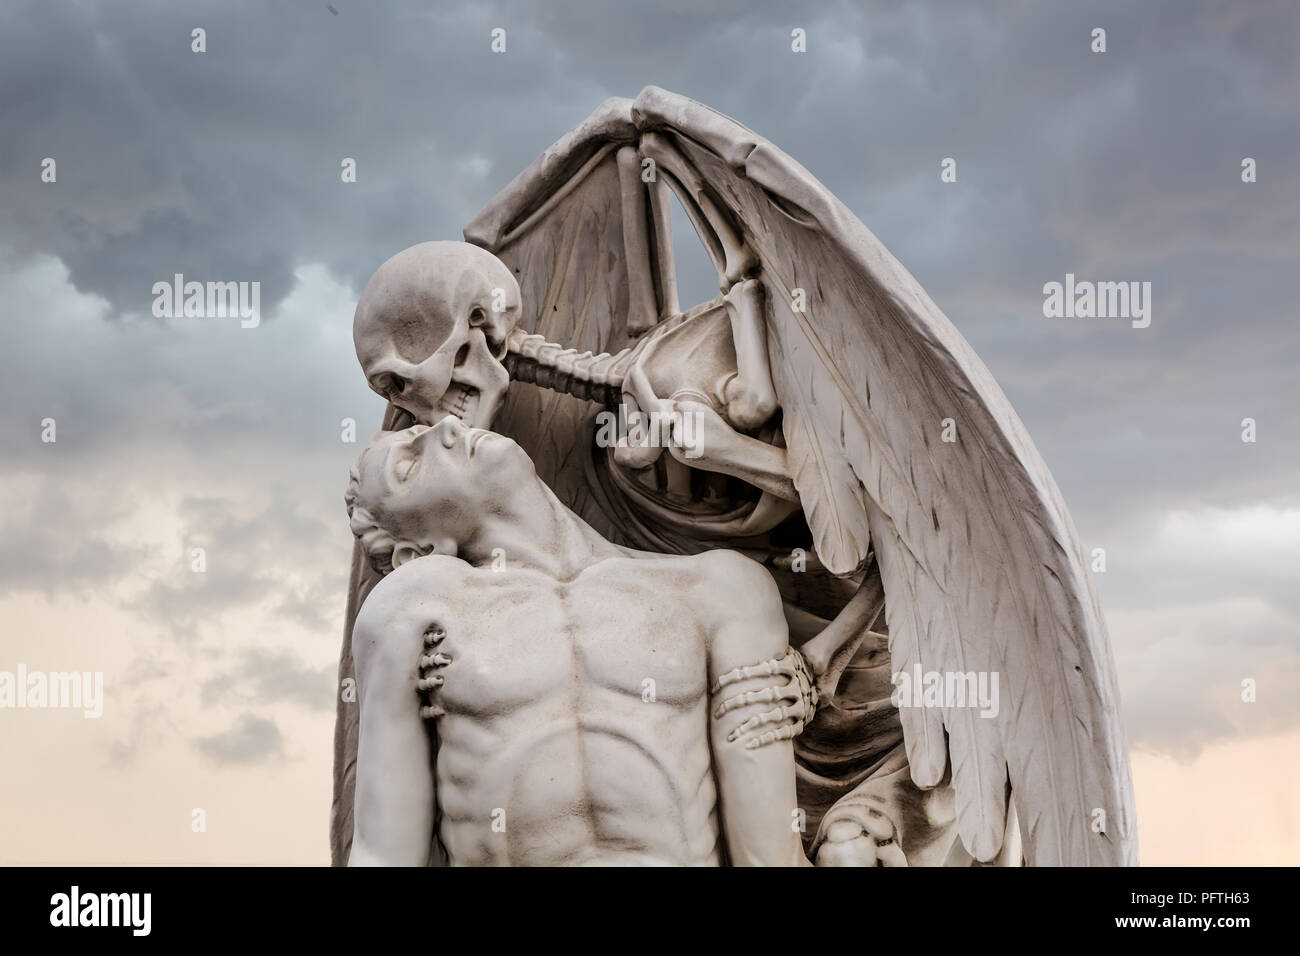 The Kiss of Death statue in Poblenou Cemetery in Barcelona. This marble sculpture depicts death, as a winged skeleton, kissing a handsome young man. Stock Photo